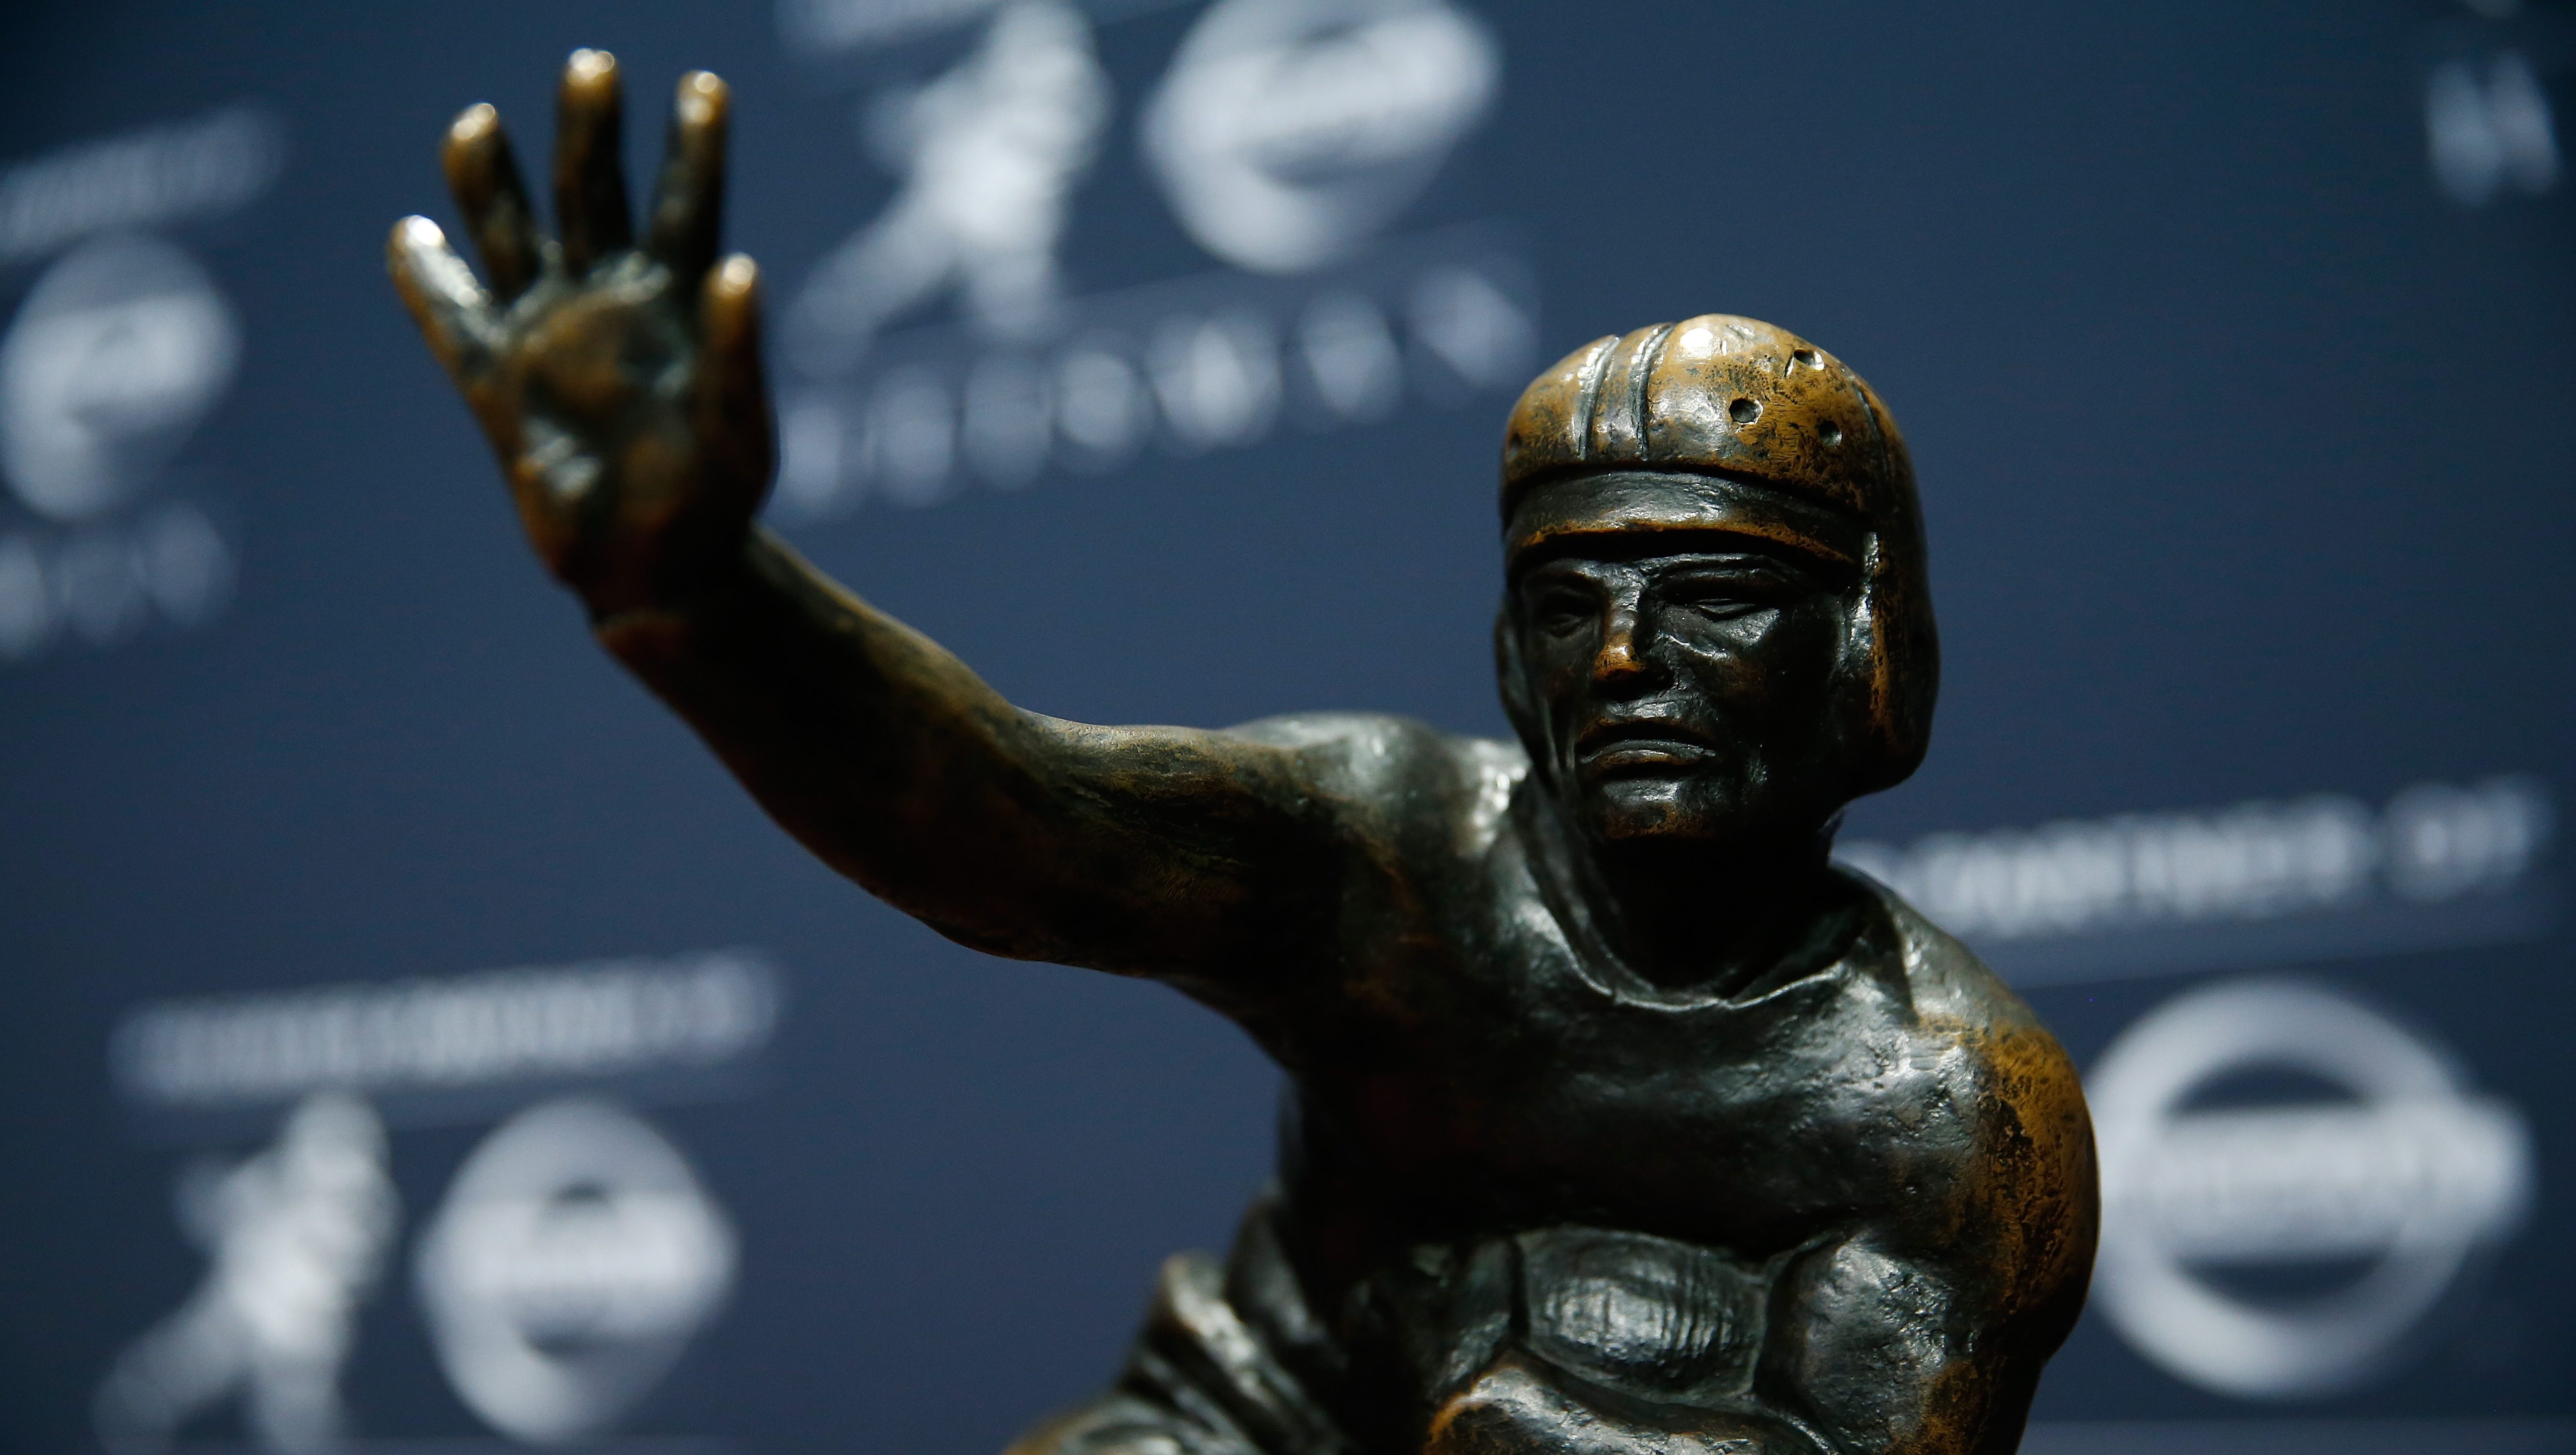 How to Watch Heisman Trophy Ceremony Online Without Cable